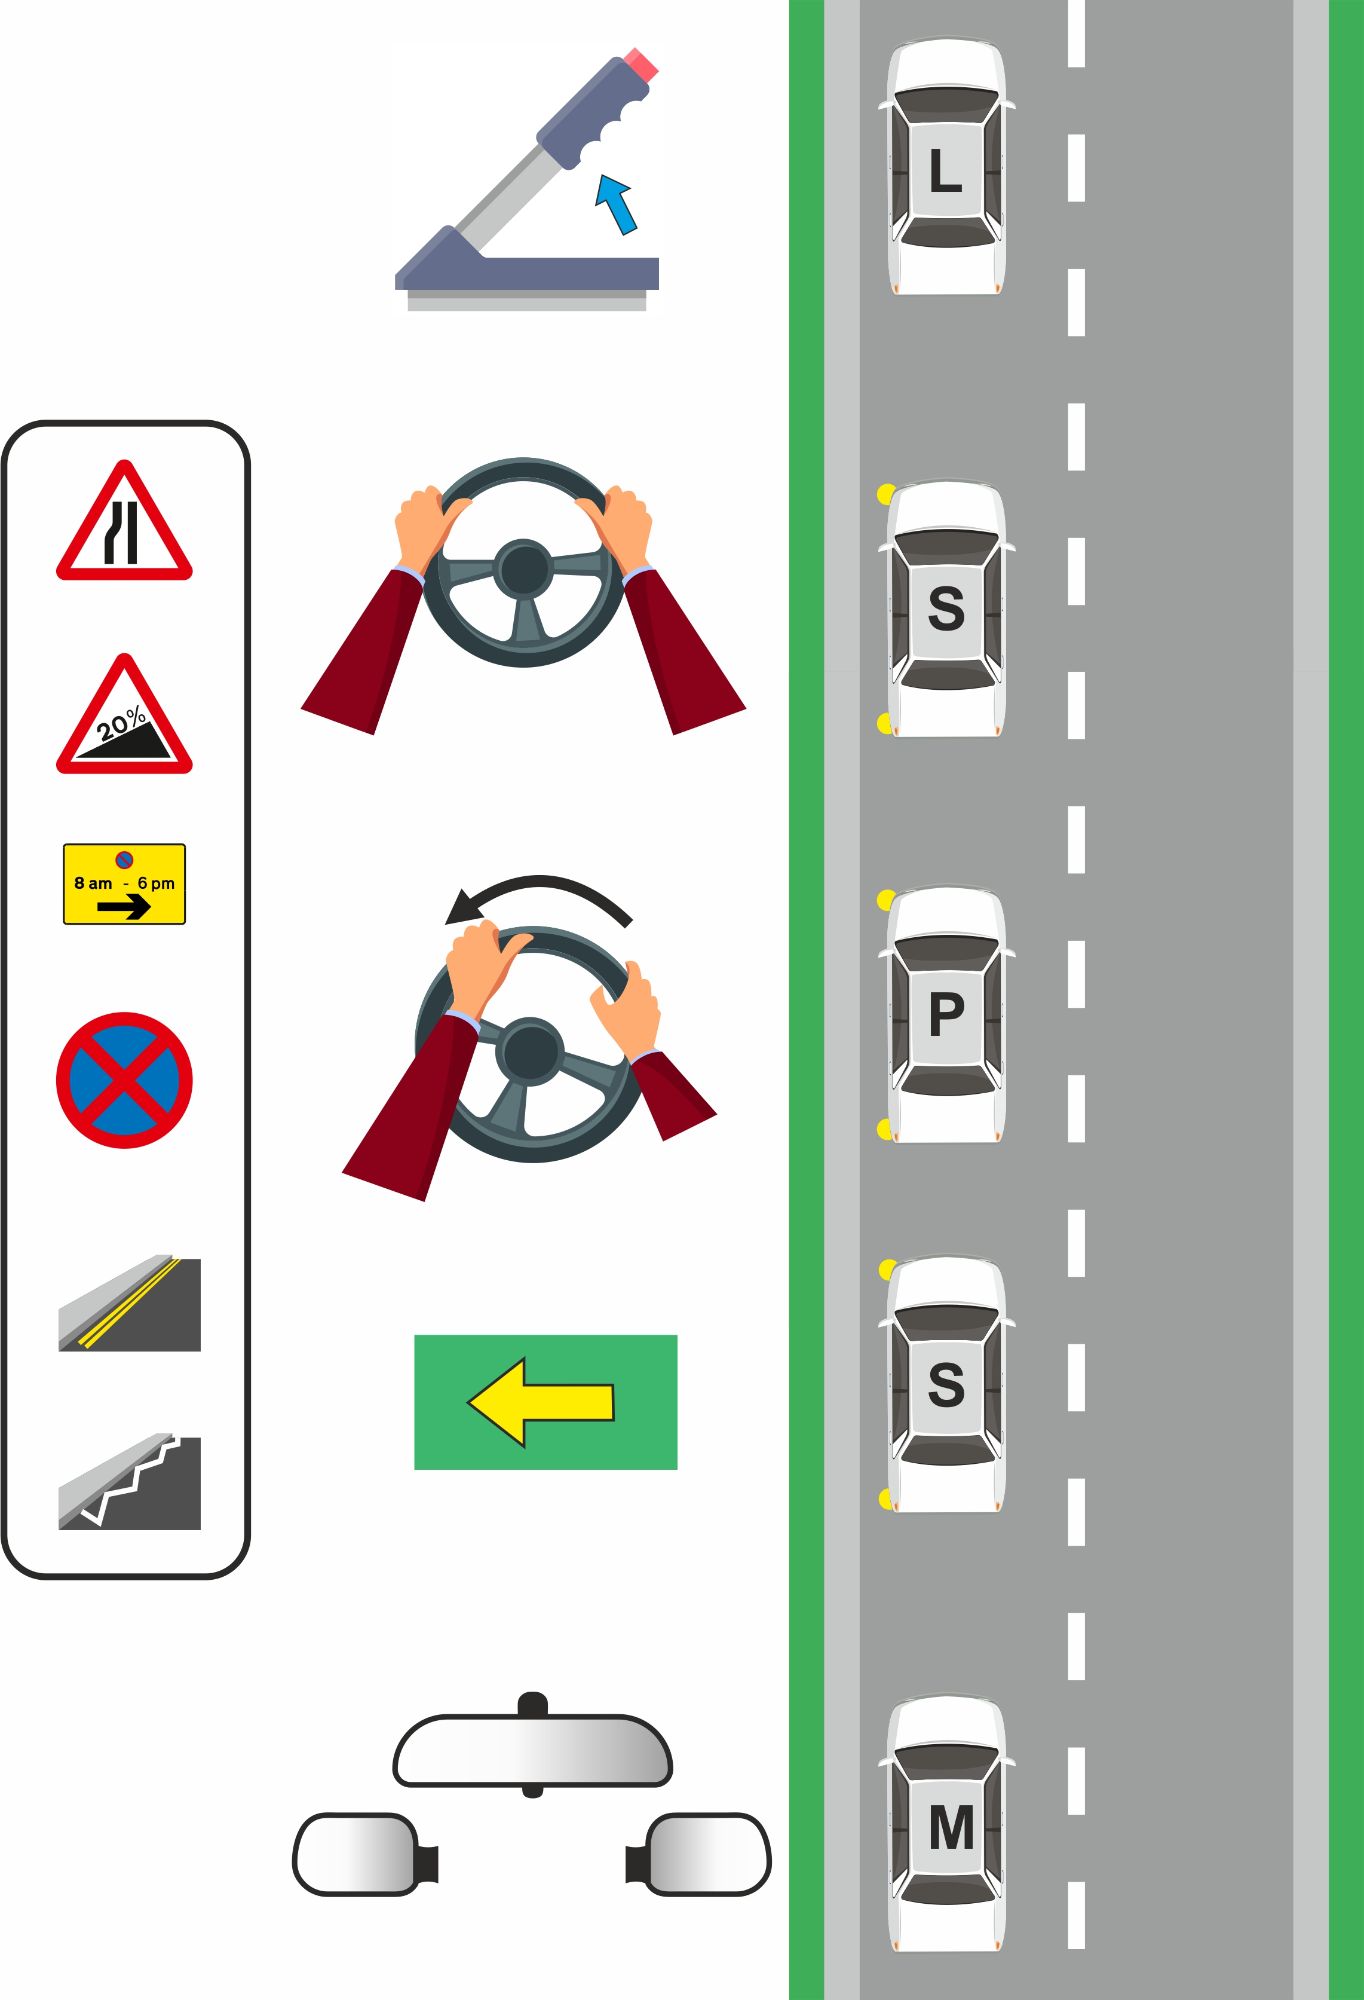 Once you have seen there are no junctions, bus stops, double yellow lines, zigzag lines or waiting restrictions, then you can do your MSPSGL routine  MIRRORS - Centre and Left  SIGNAL - Down for left  Position - Reasonably close to and level with the kerb  Speed - Begin to break bringing the car to a gentle stop  Gear - Foot covering clutch so the car doesn't stall  Look - For the car to be level with the kerb before stopping.